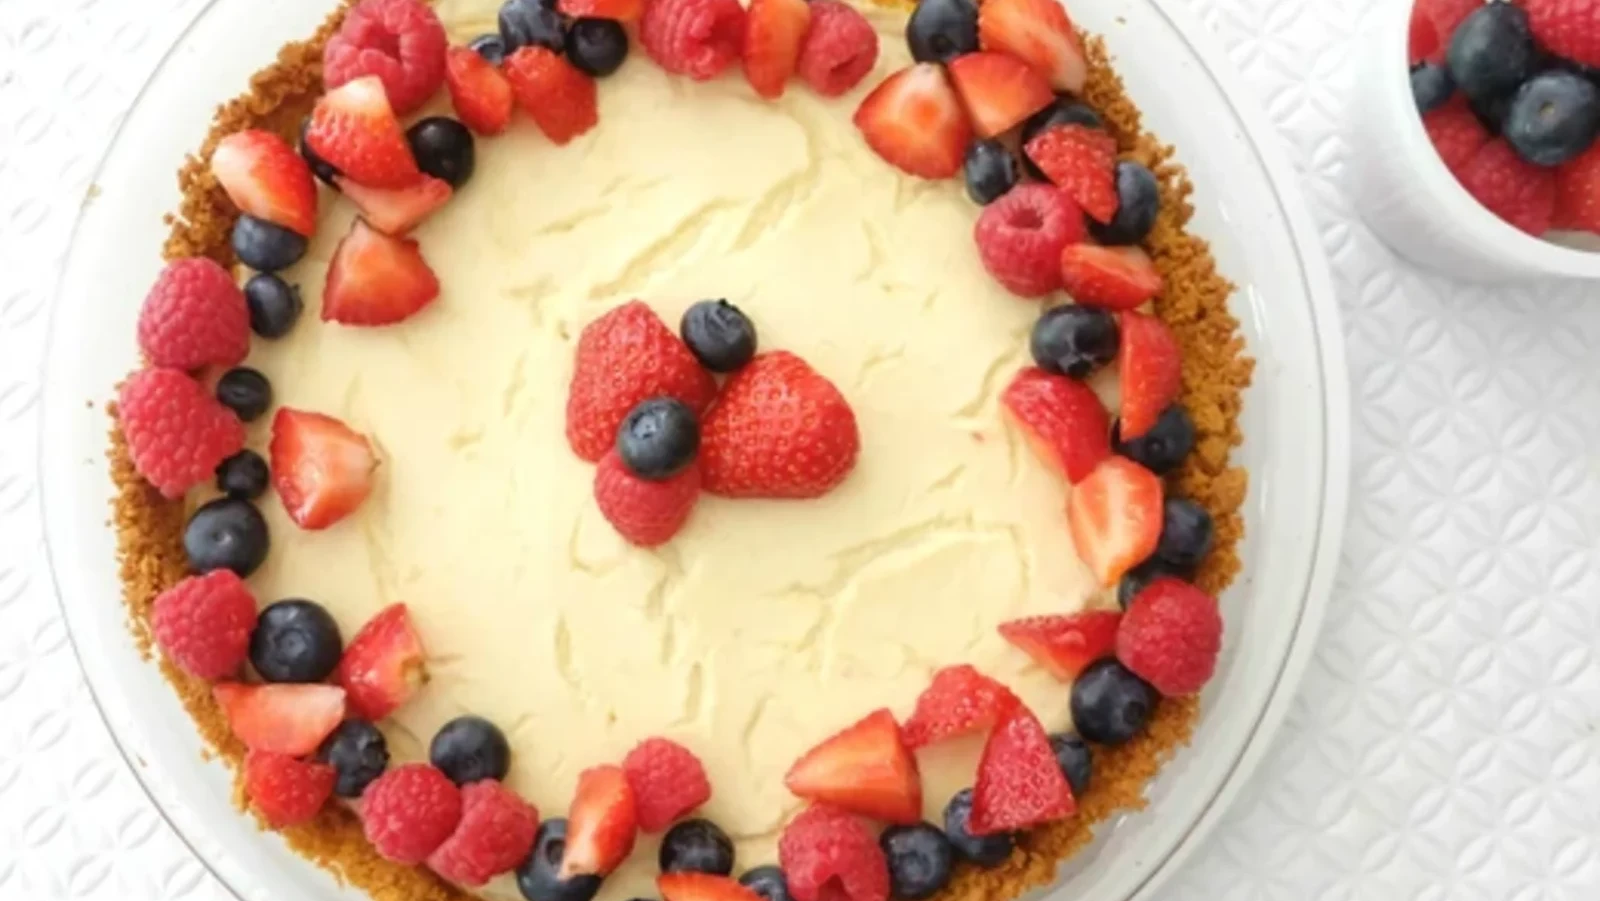 Image of Tofu Cheesecake Recipe: Sinfully Delicious and Vegan!